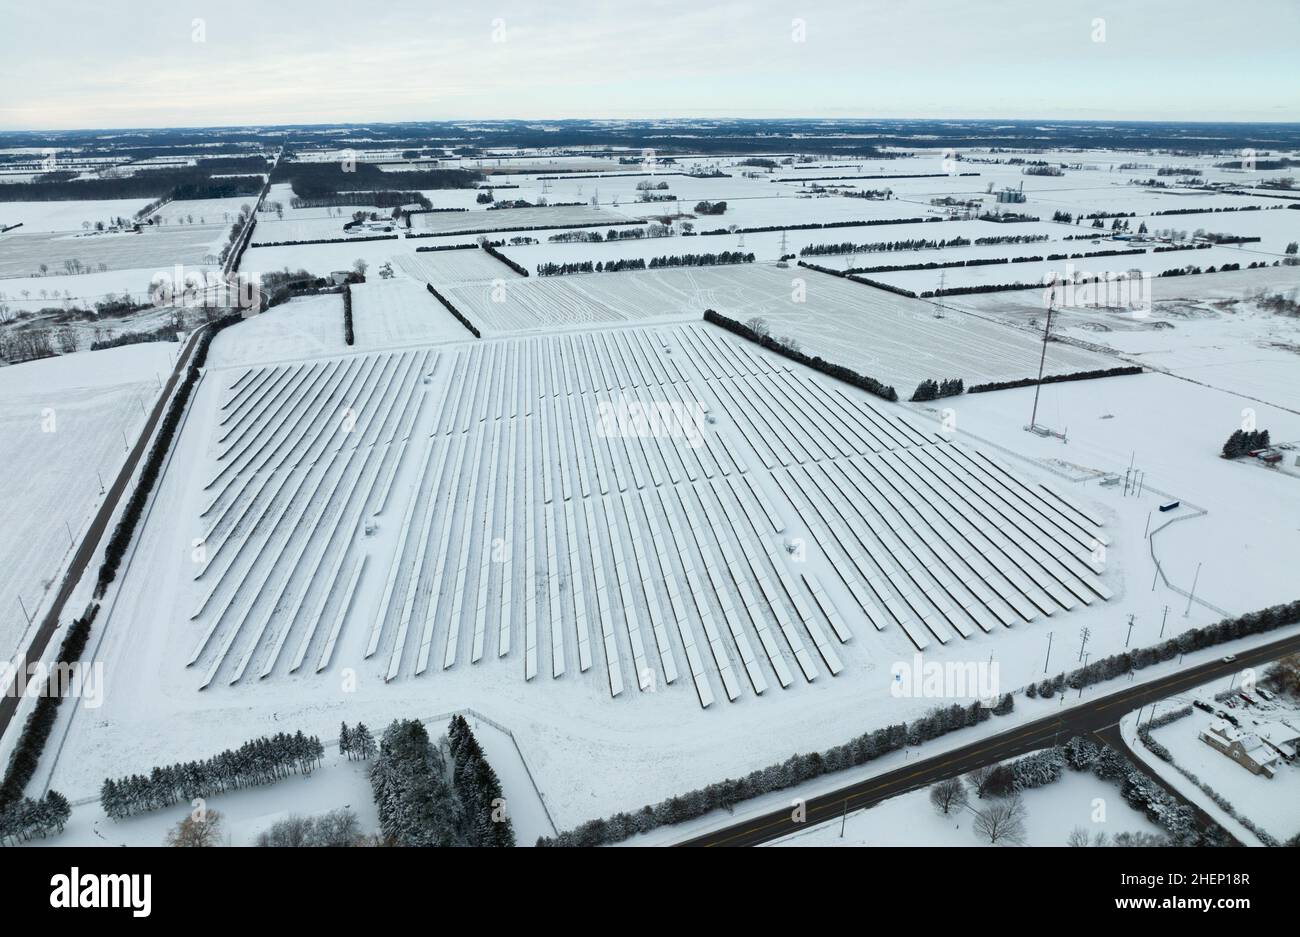 snow-covered-solar-panels-on-a-solar-farm-are-seen-on-the-morning-of-a-winters-day-in-the-rural-canadian-community-2HEP18R.jpg